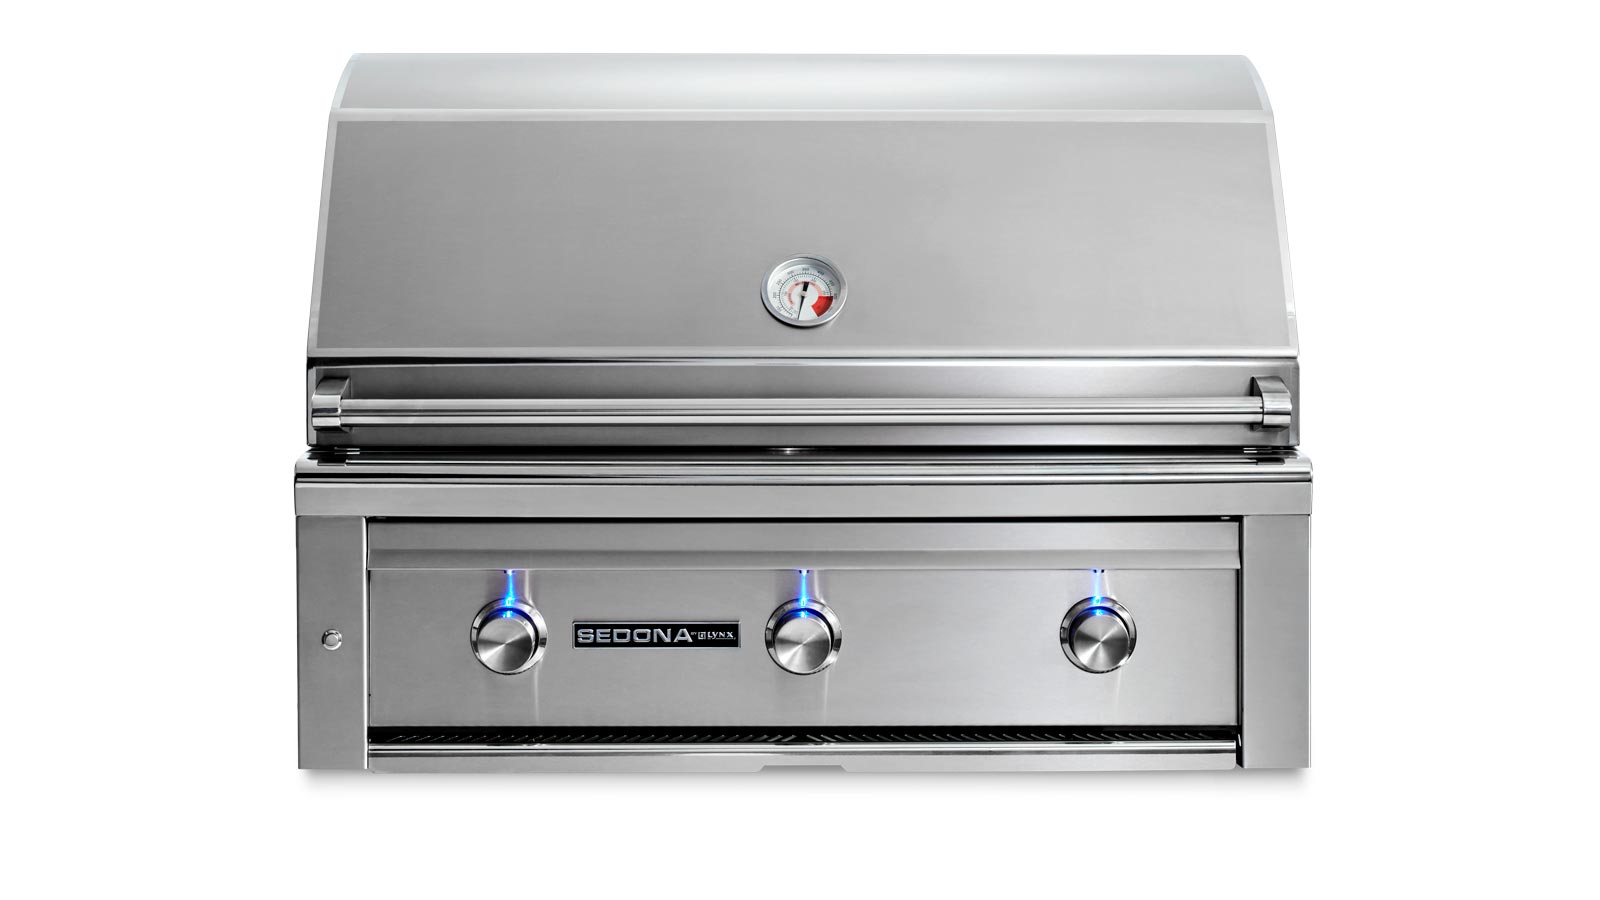 Sedona by Lynx L600 36" Built-in Grill